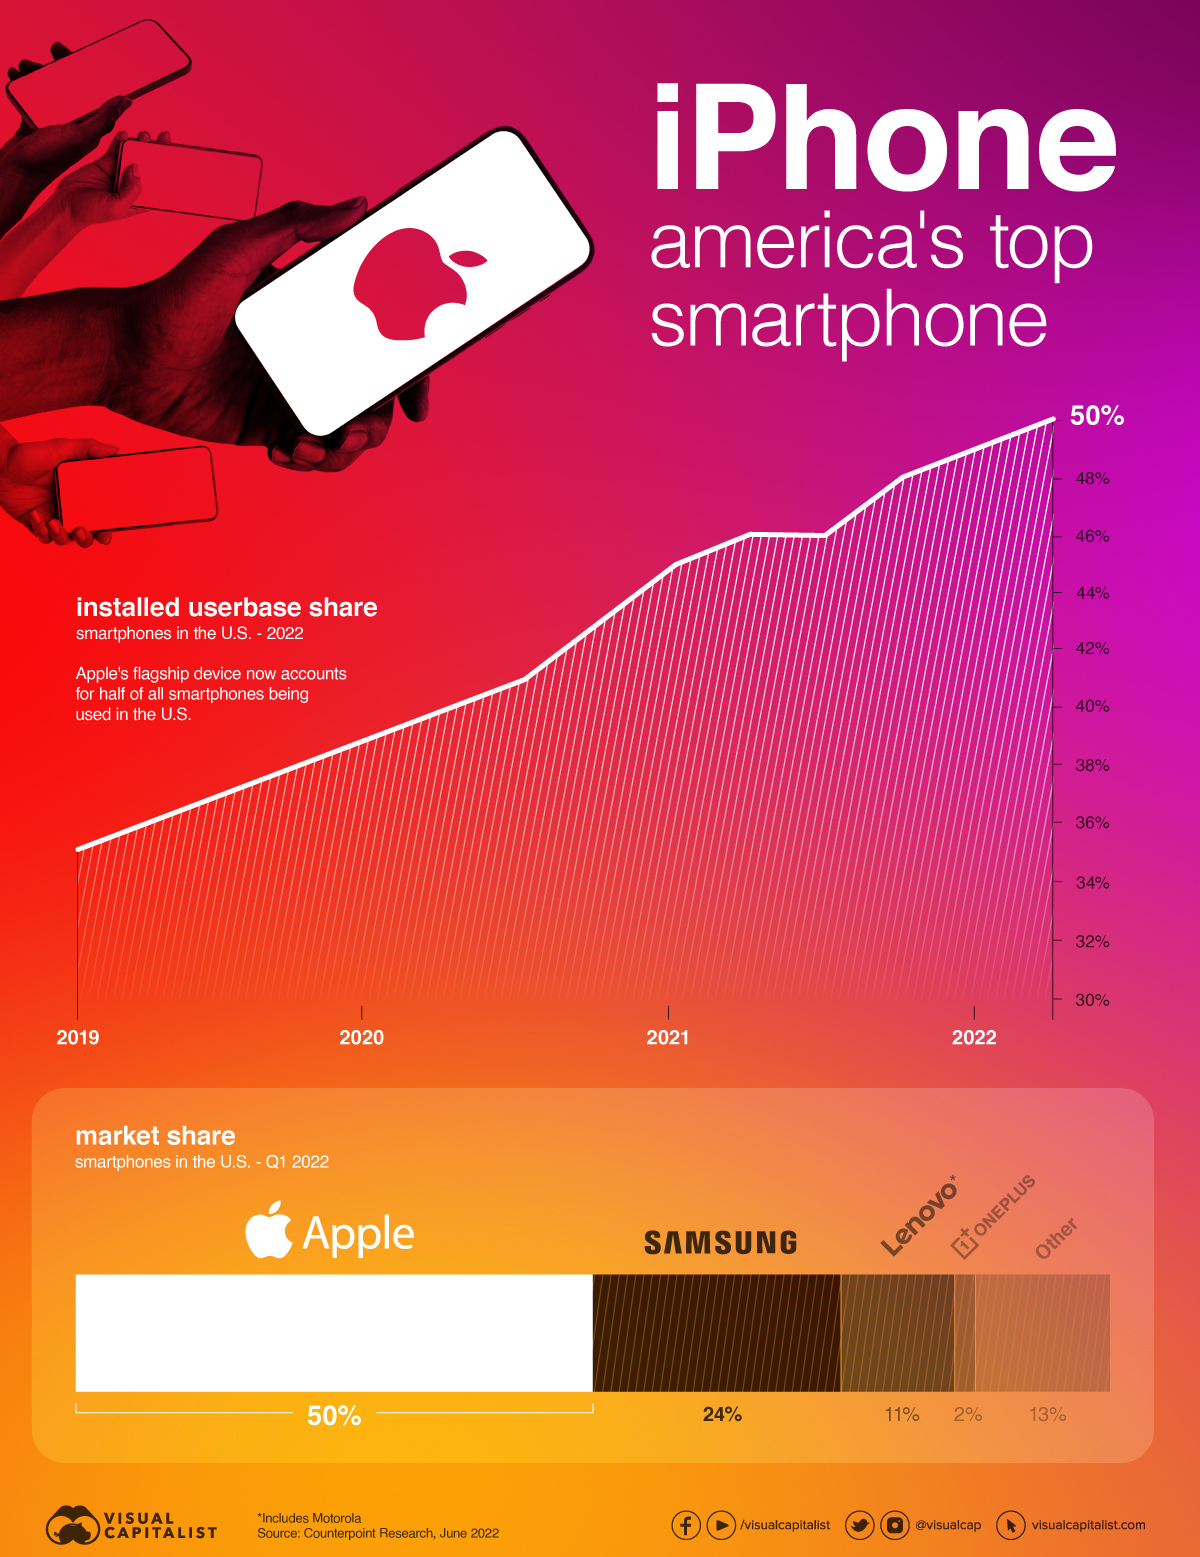 what is the market share of iphone vs android?